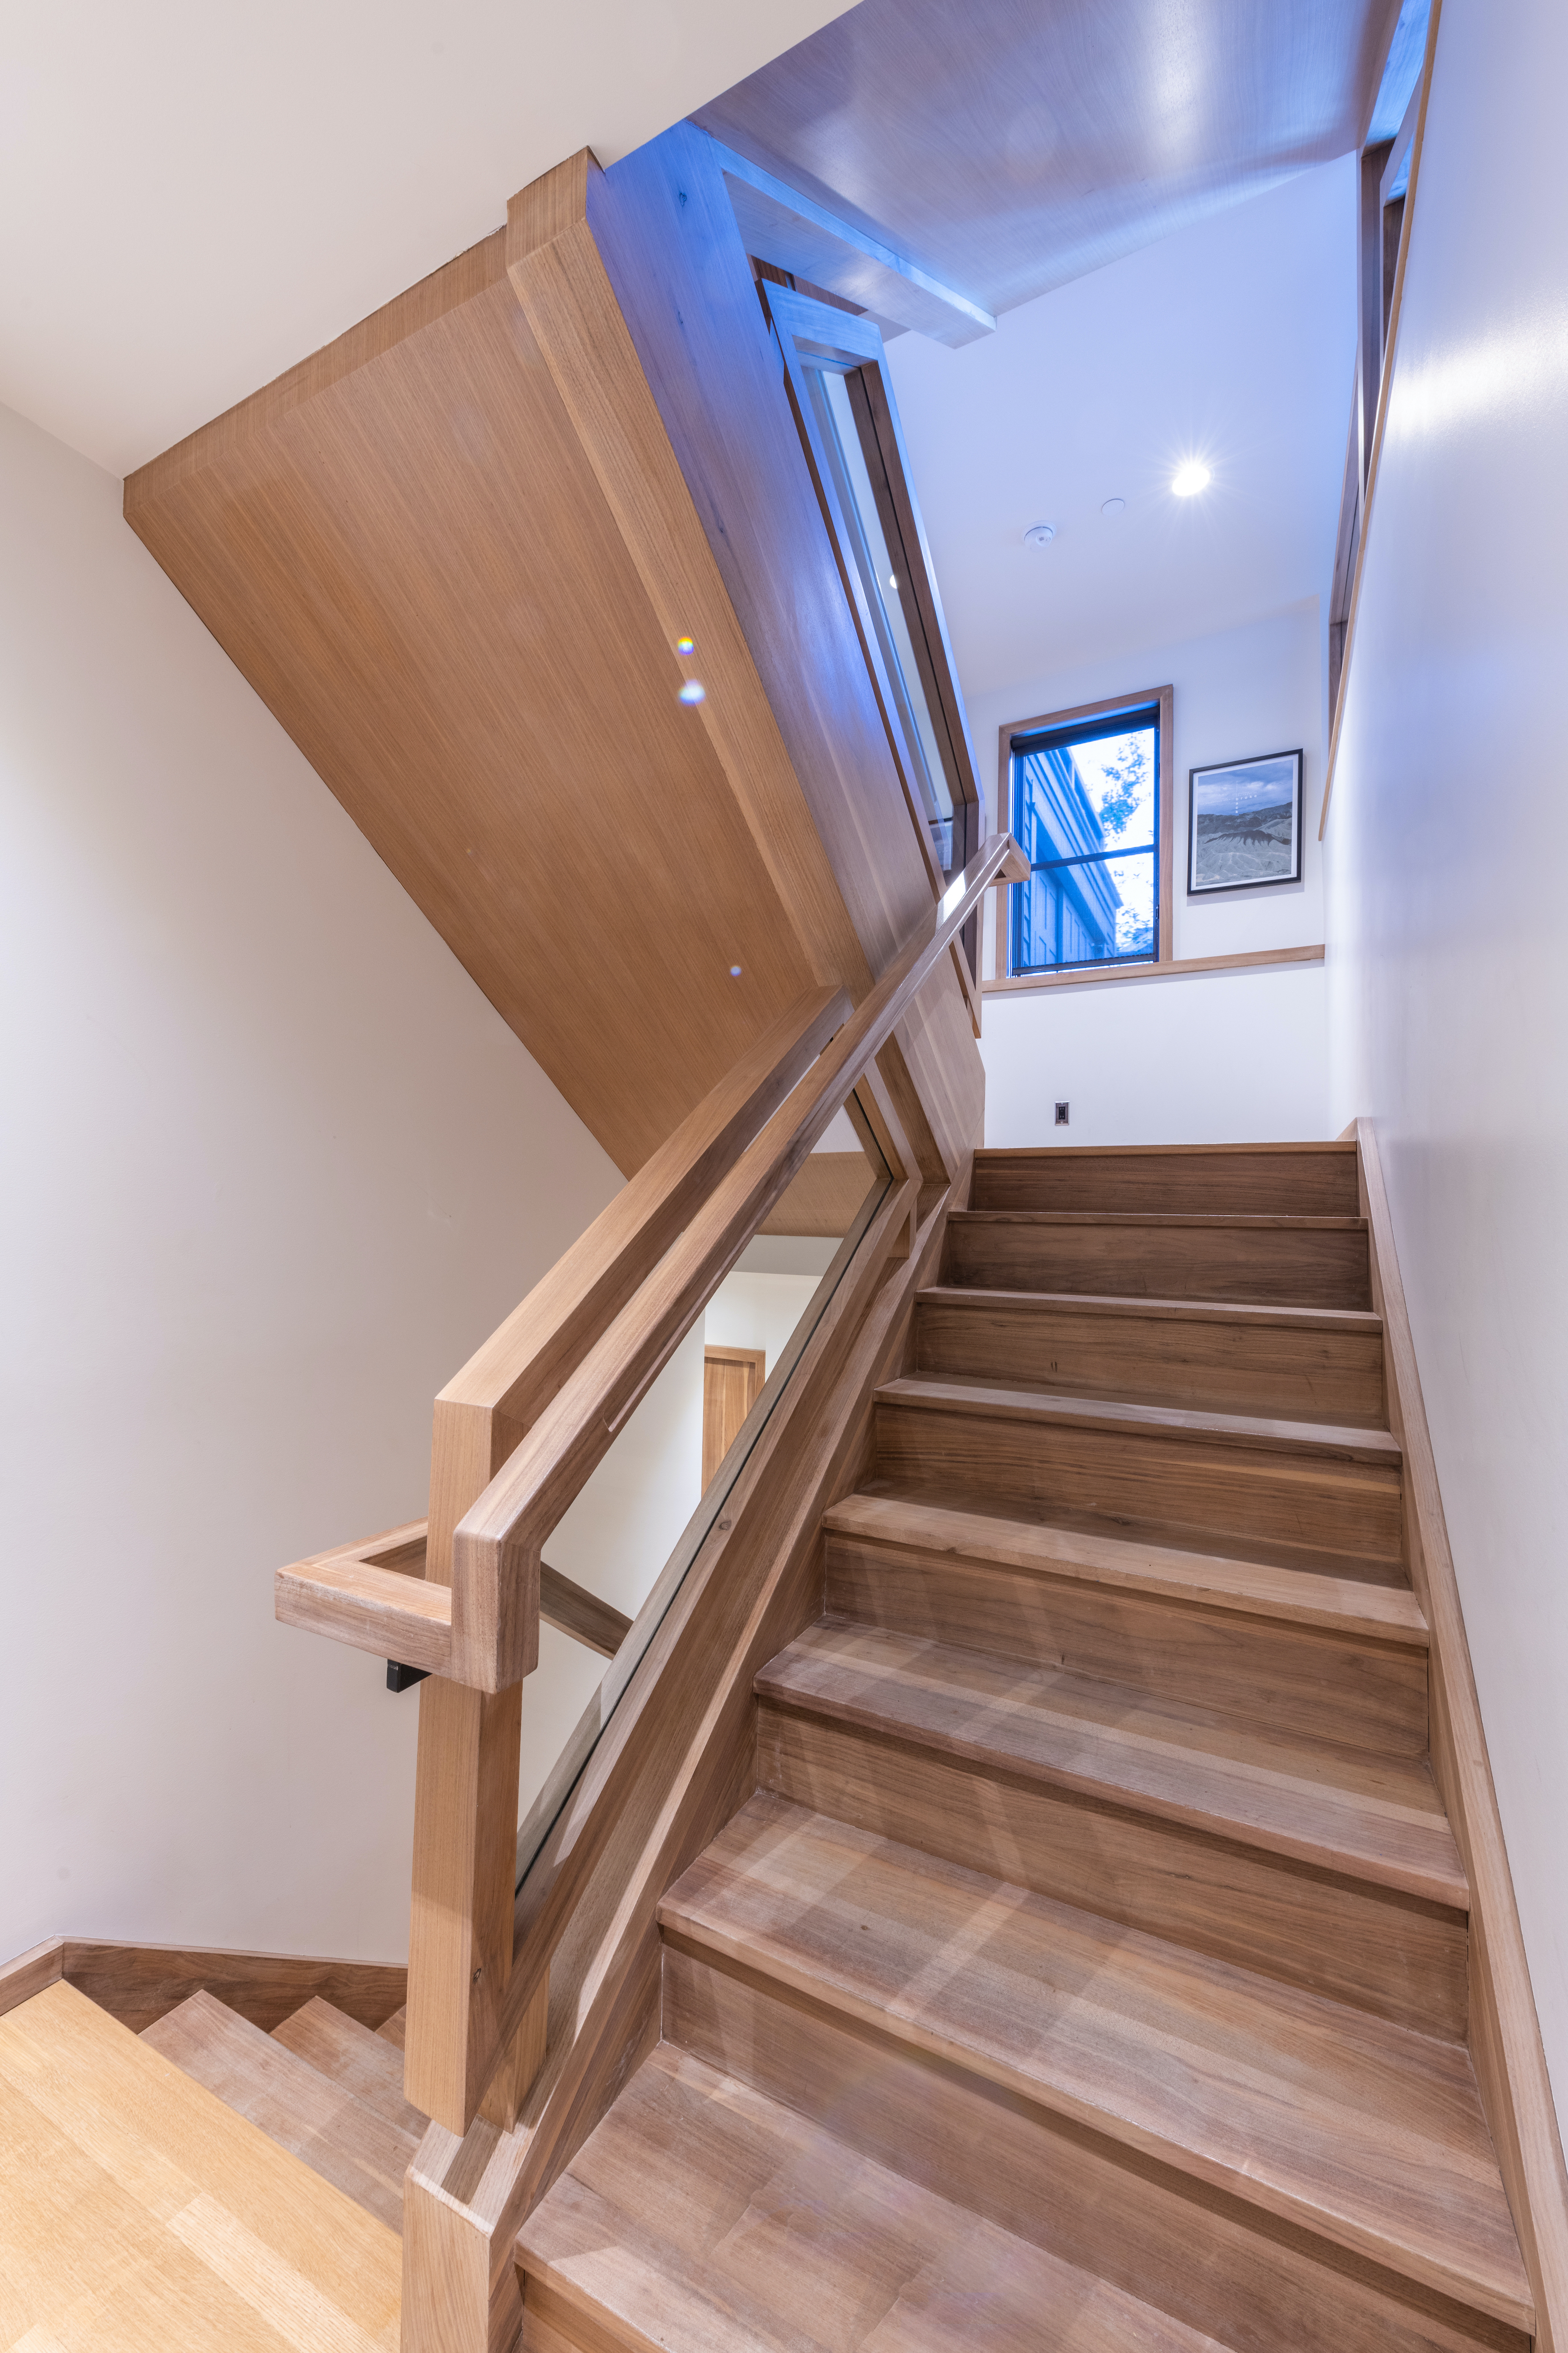 Stairs from entry level to main